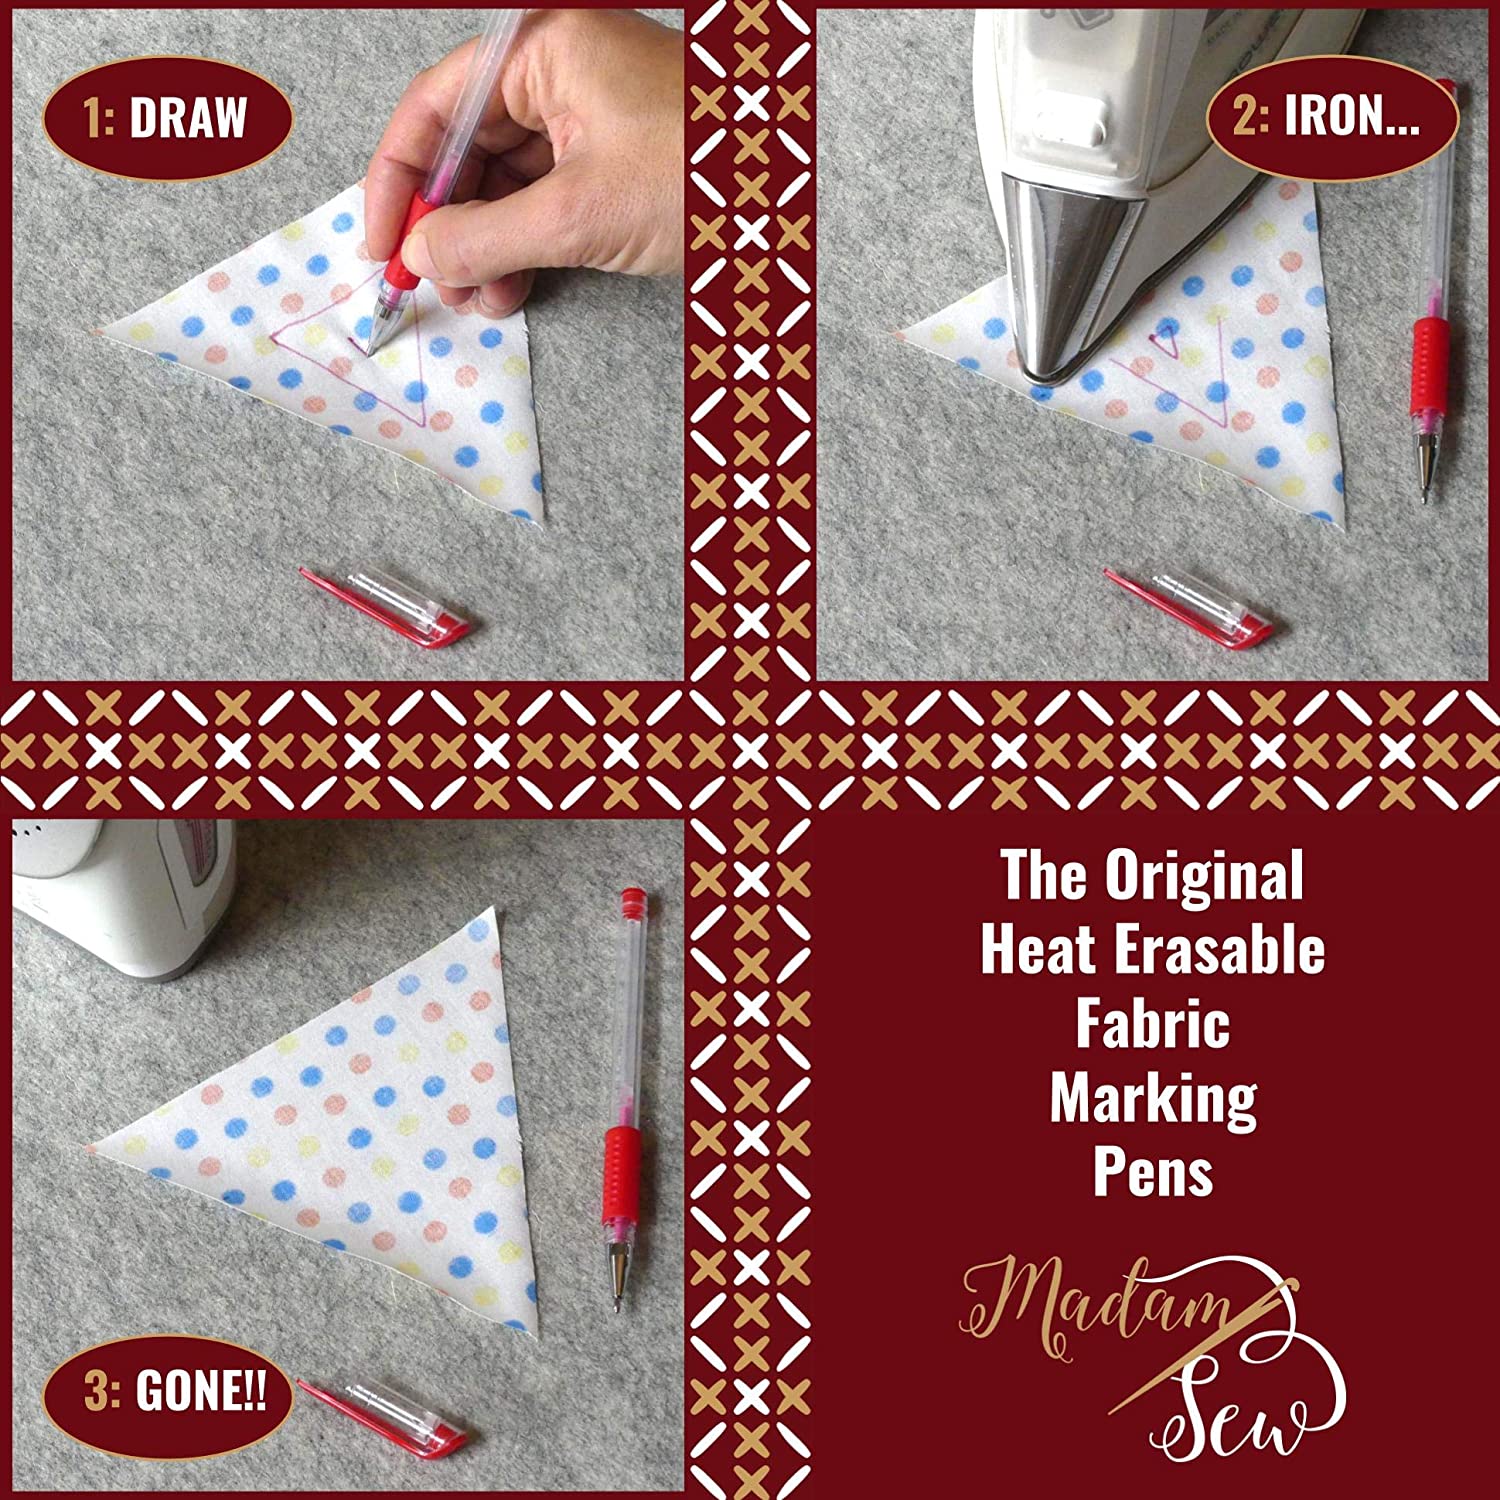 Madam Sew Heat Erasable Fabric Marking Pens as a Gift for Beginner Quilters